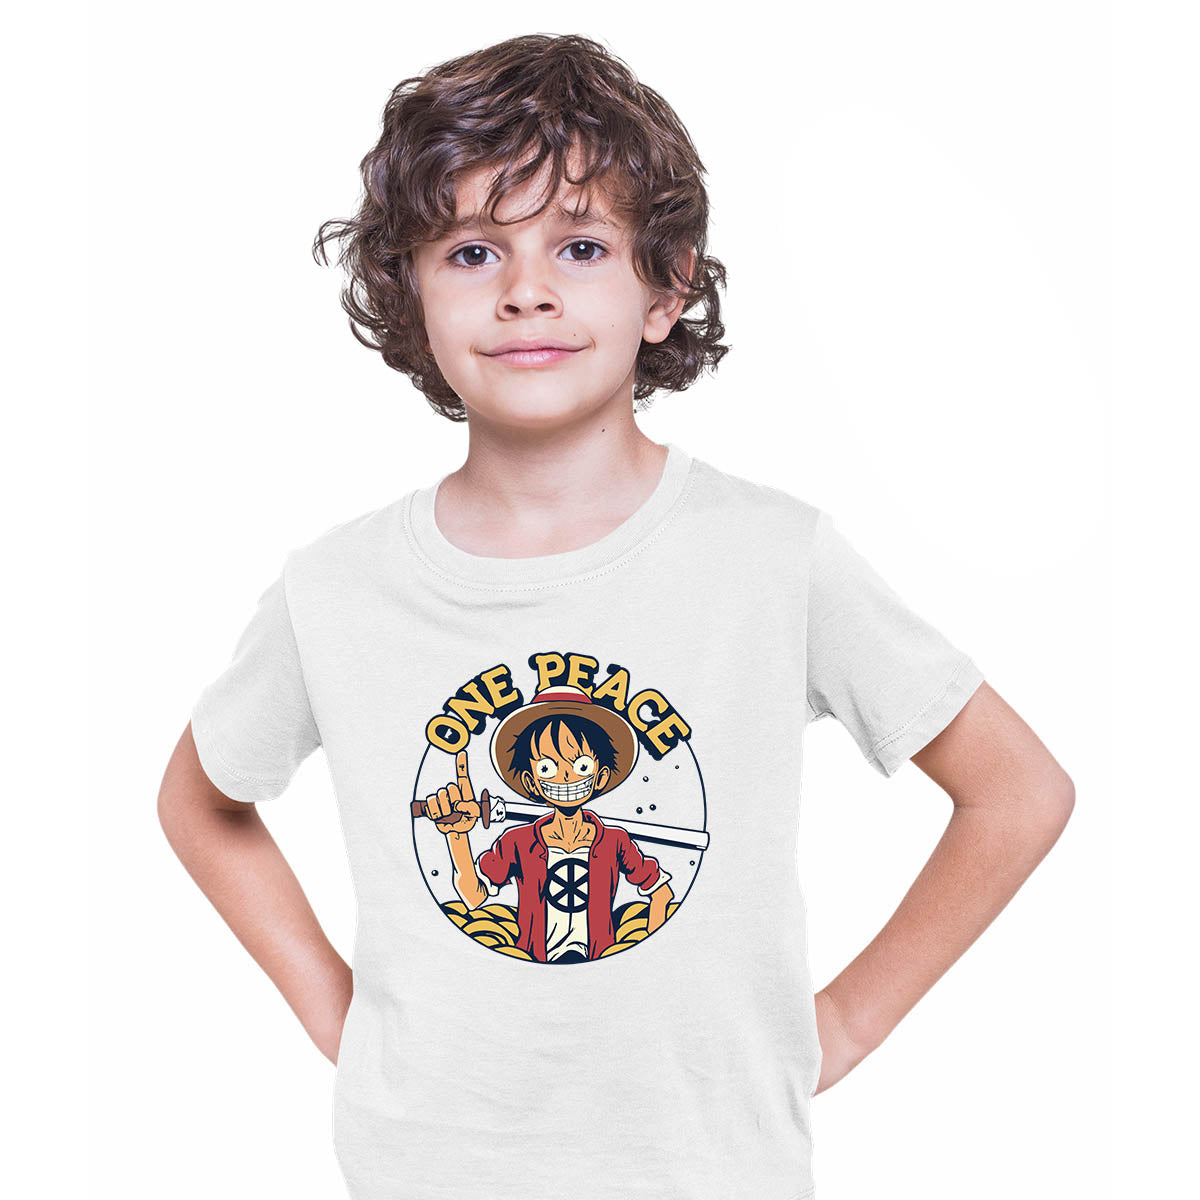 One Peace Monkey D. Luffy Funny One Piece Anime Manga White T-shirt for Kids